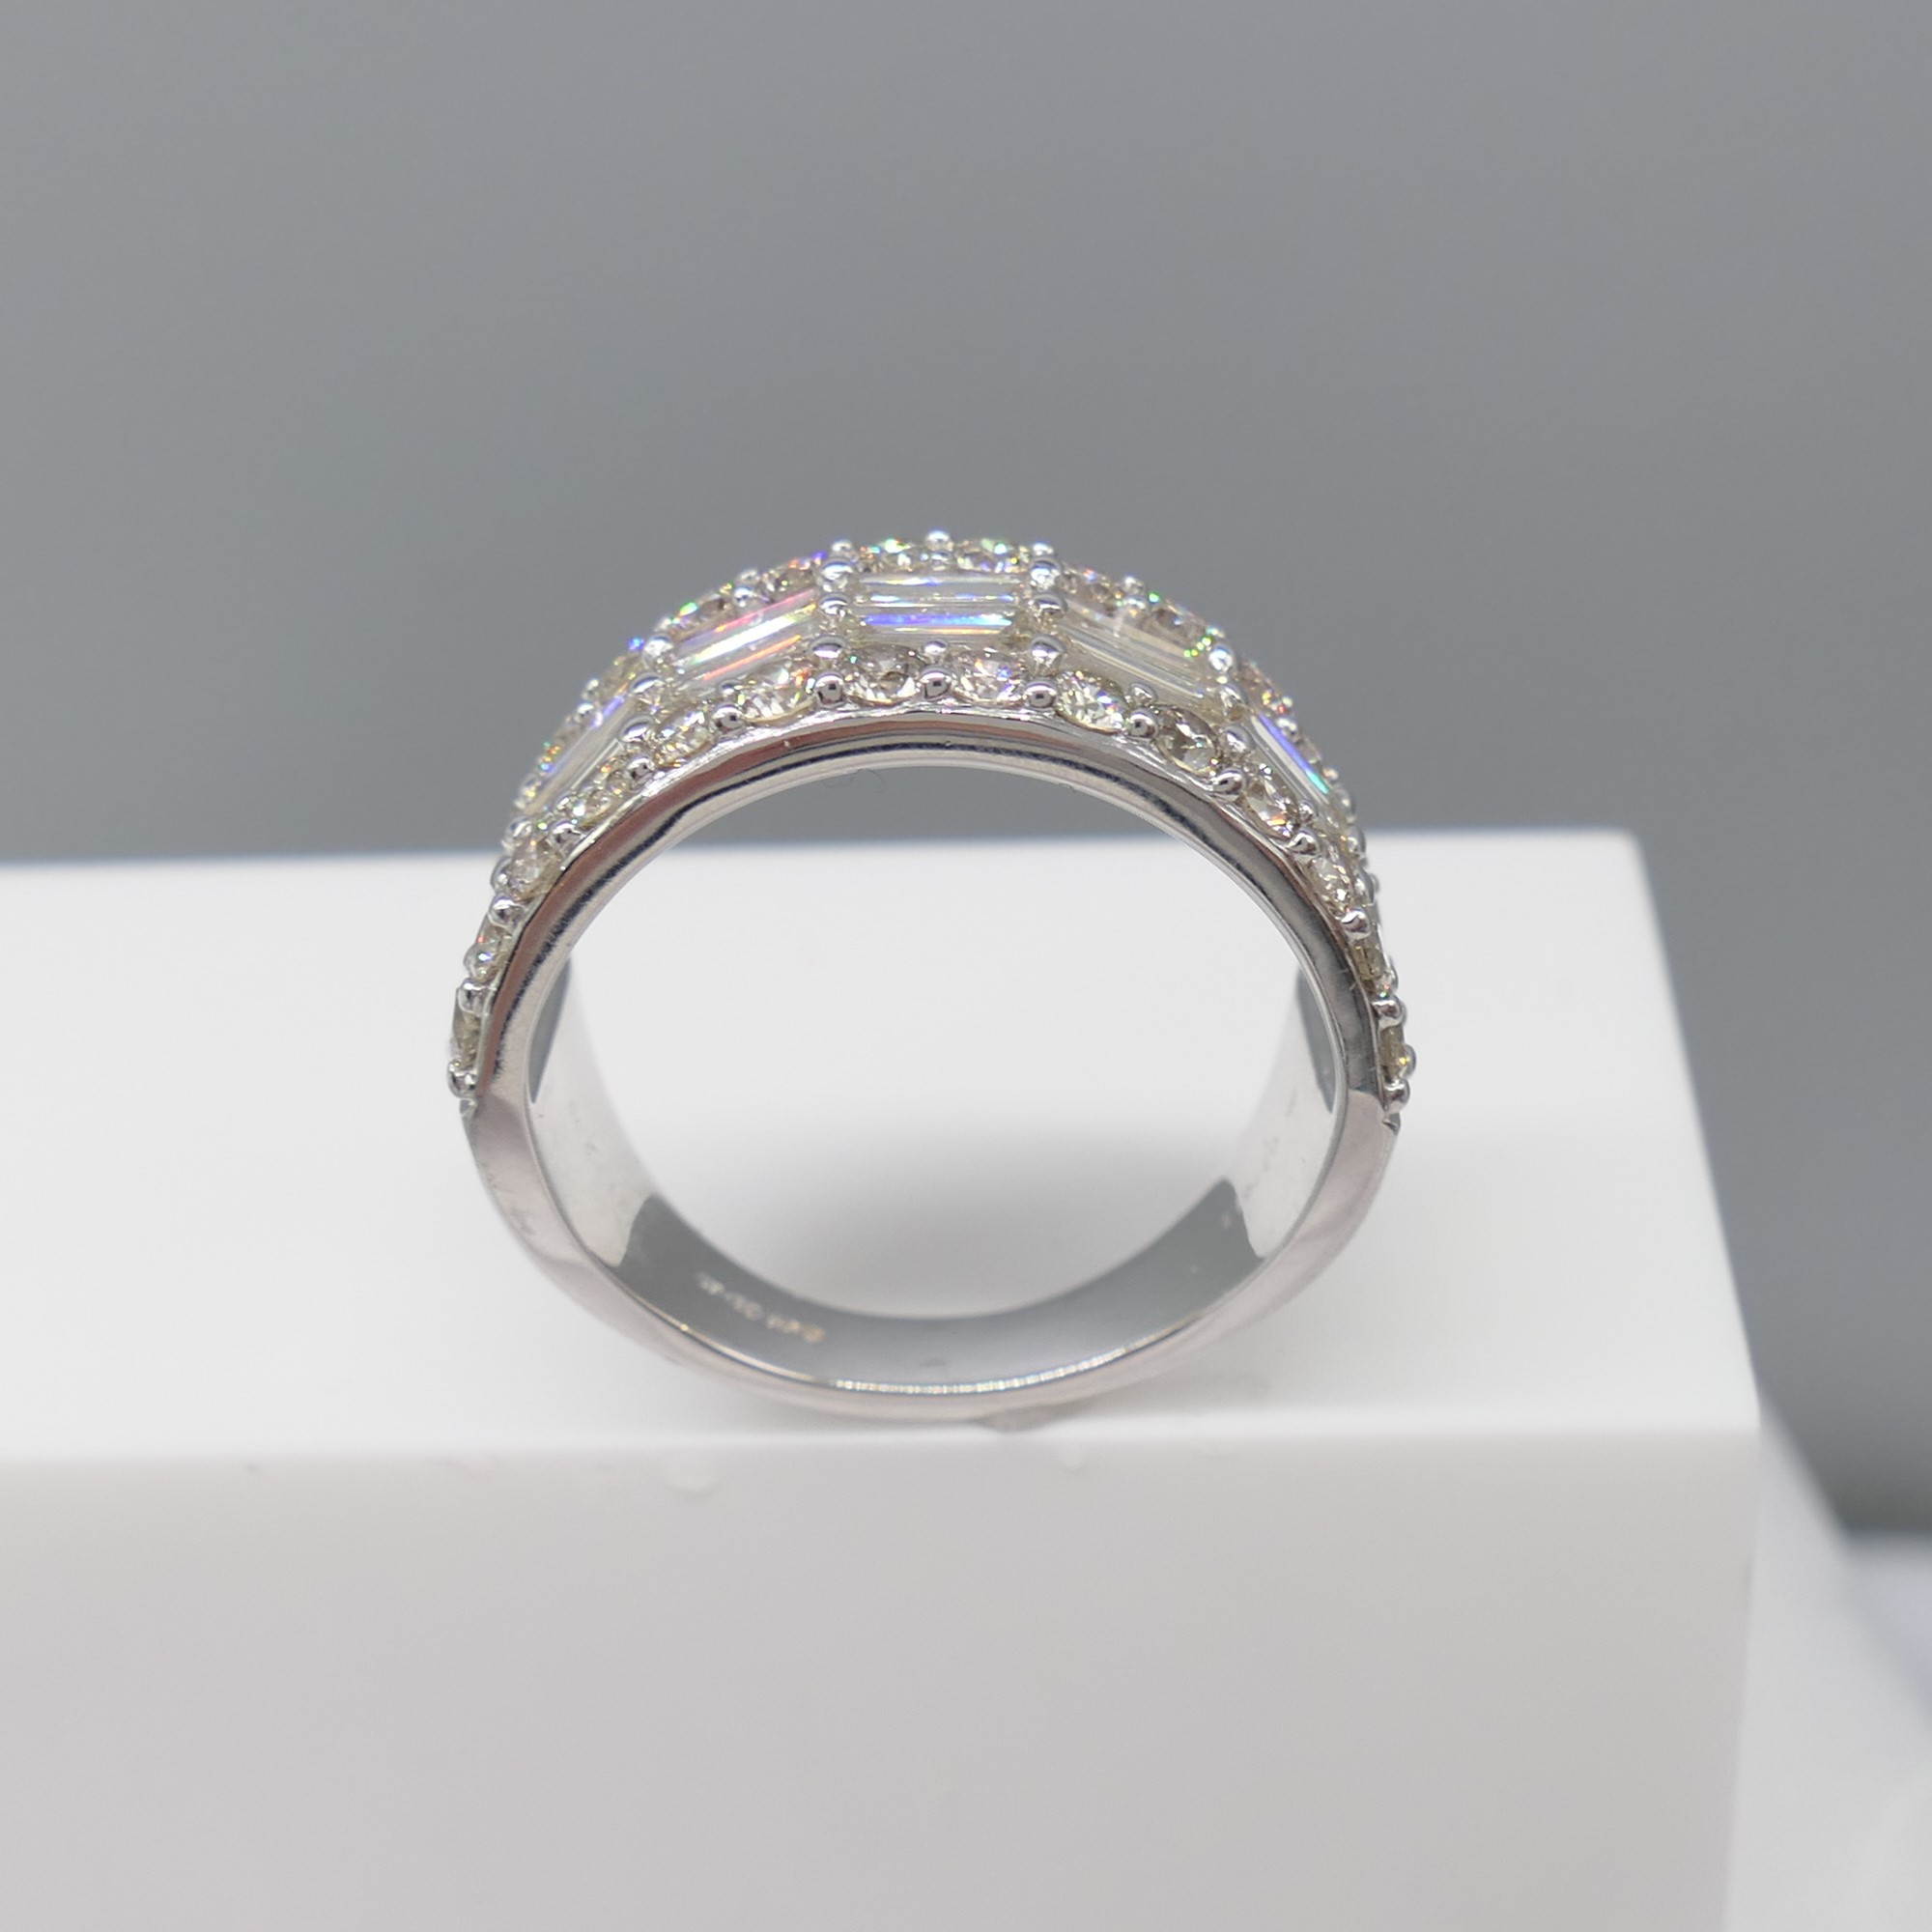 2.72 Carat Round Brilliant-Cut and Baguette-Cut Diamond Cocktail Ring - Image 2 of 6